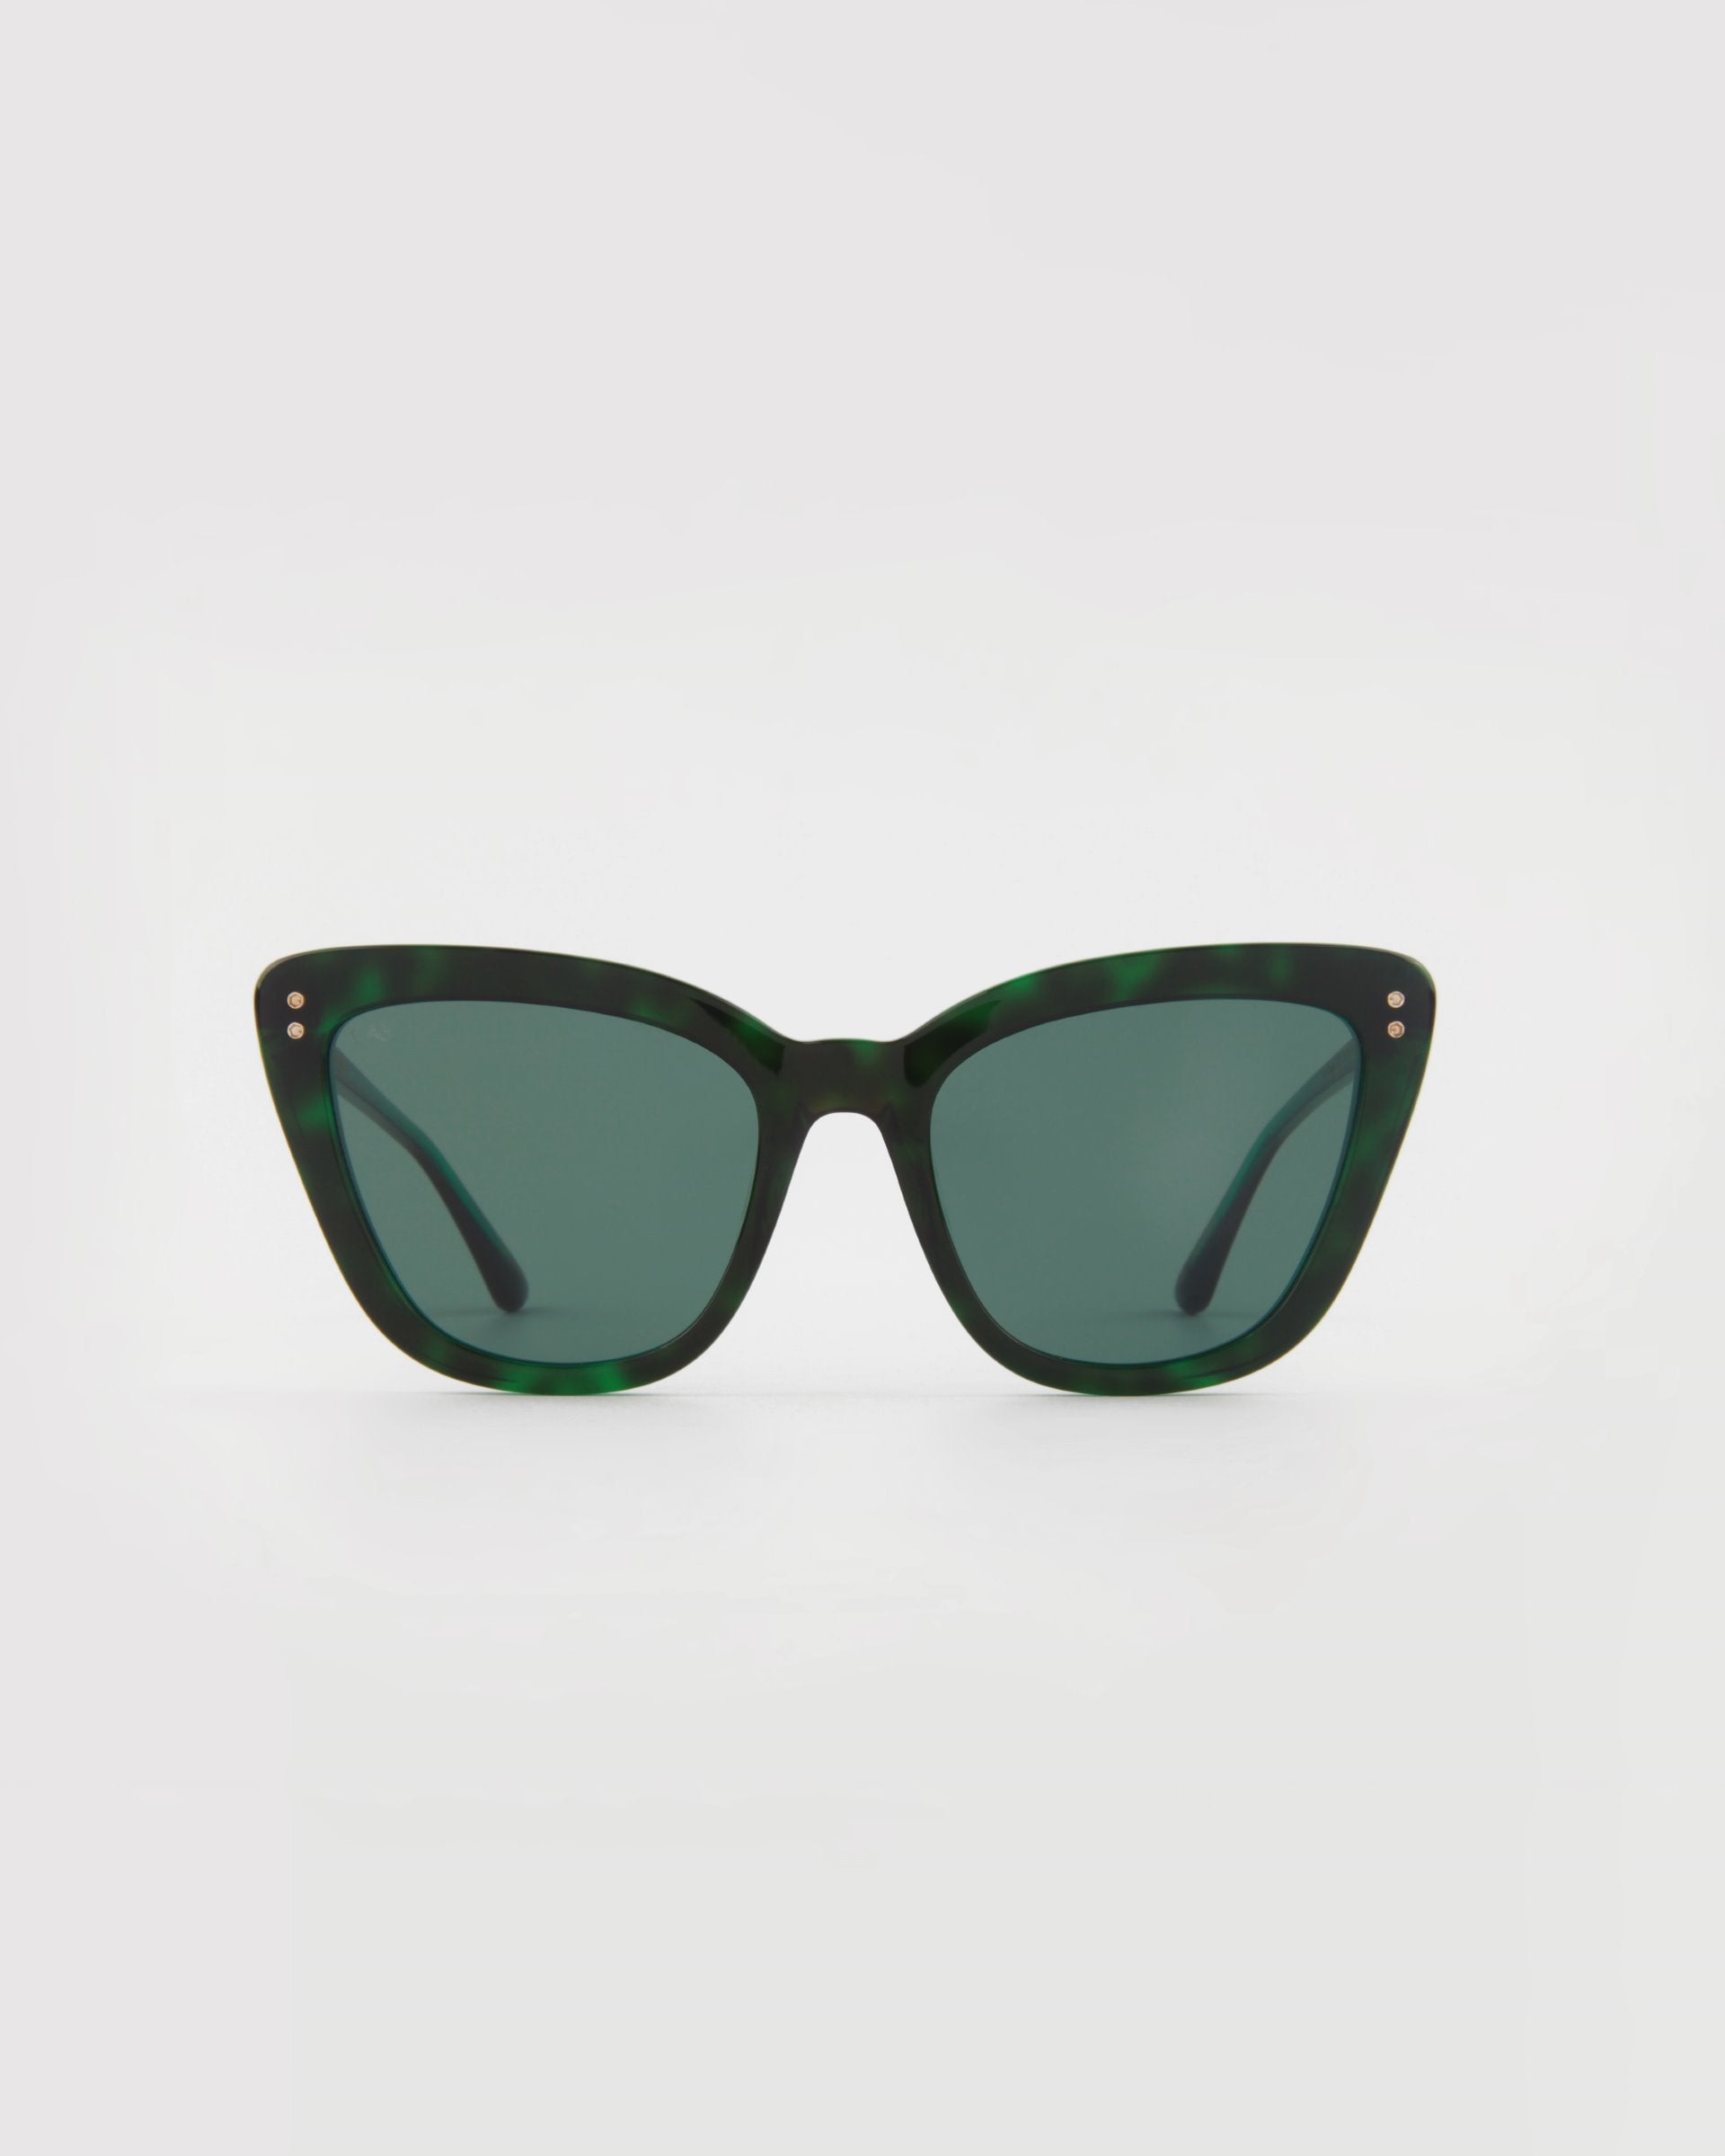 A pair of **Ice Cream by For Art's Sake®** sunglasses with cat-eye frames in dark green tortoiseshell and dark lenses is centered against a plain, light background. The glasses have a slight upturn at the outer corners, metal accents near the hinges, and offer UVA & UVB protection.